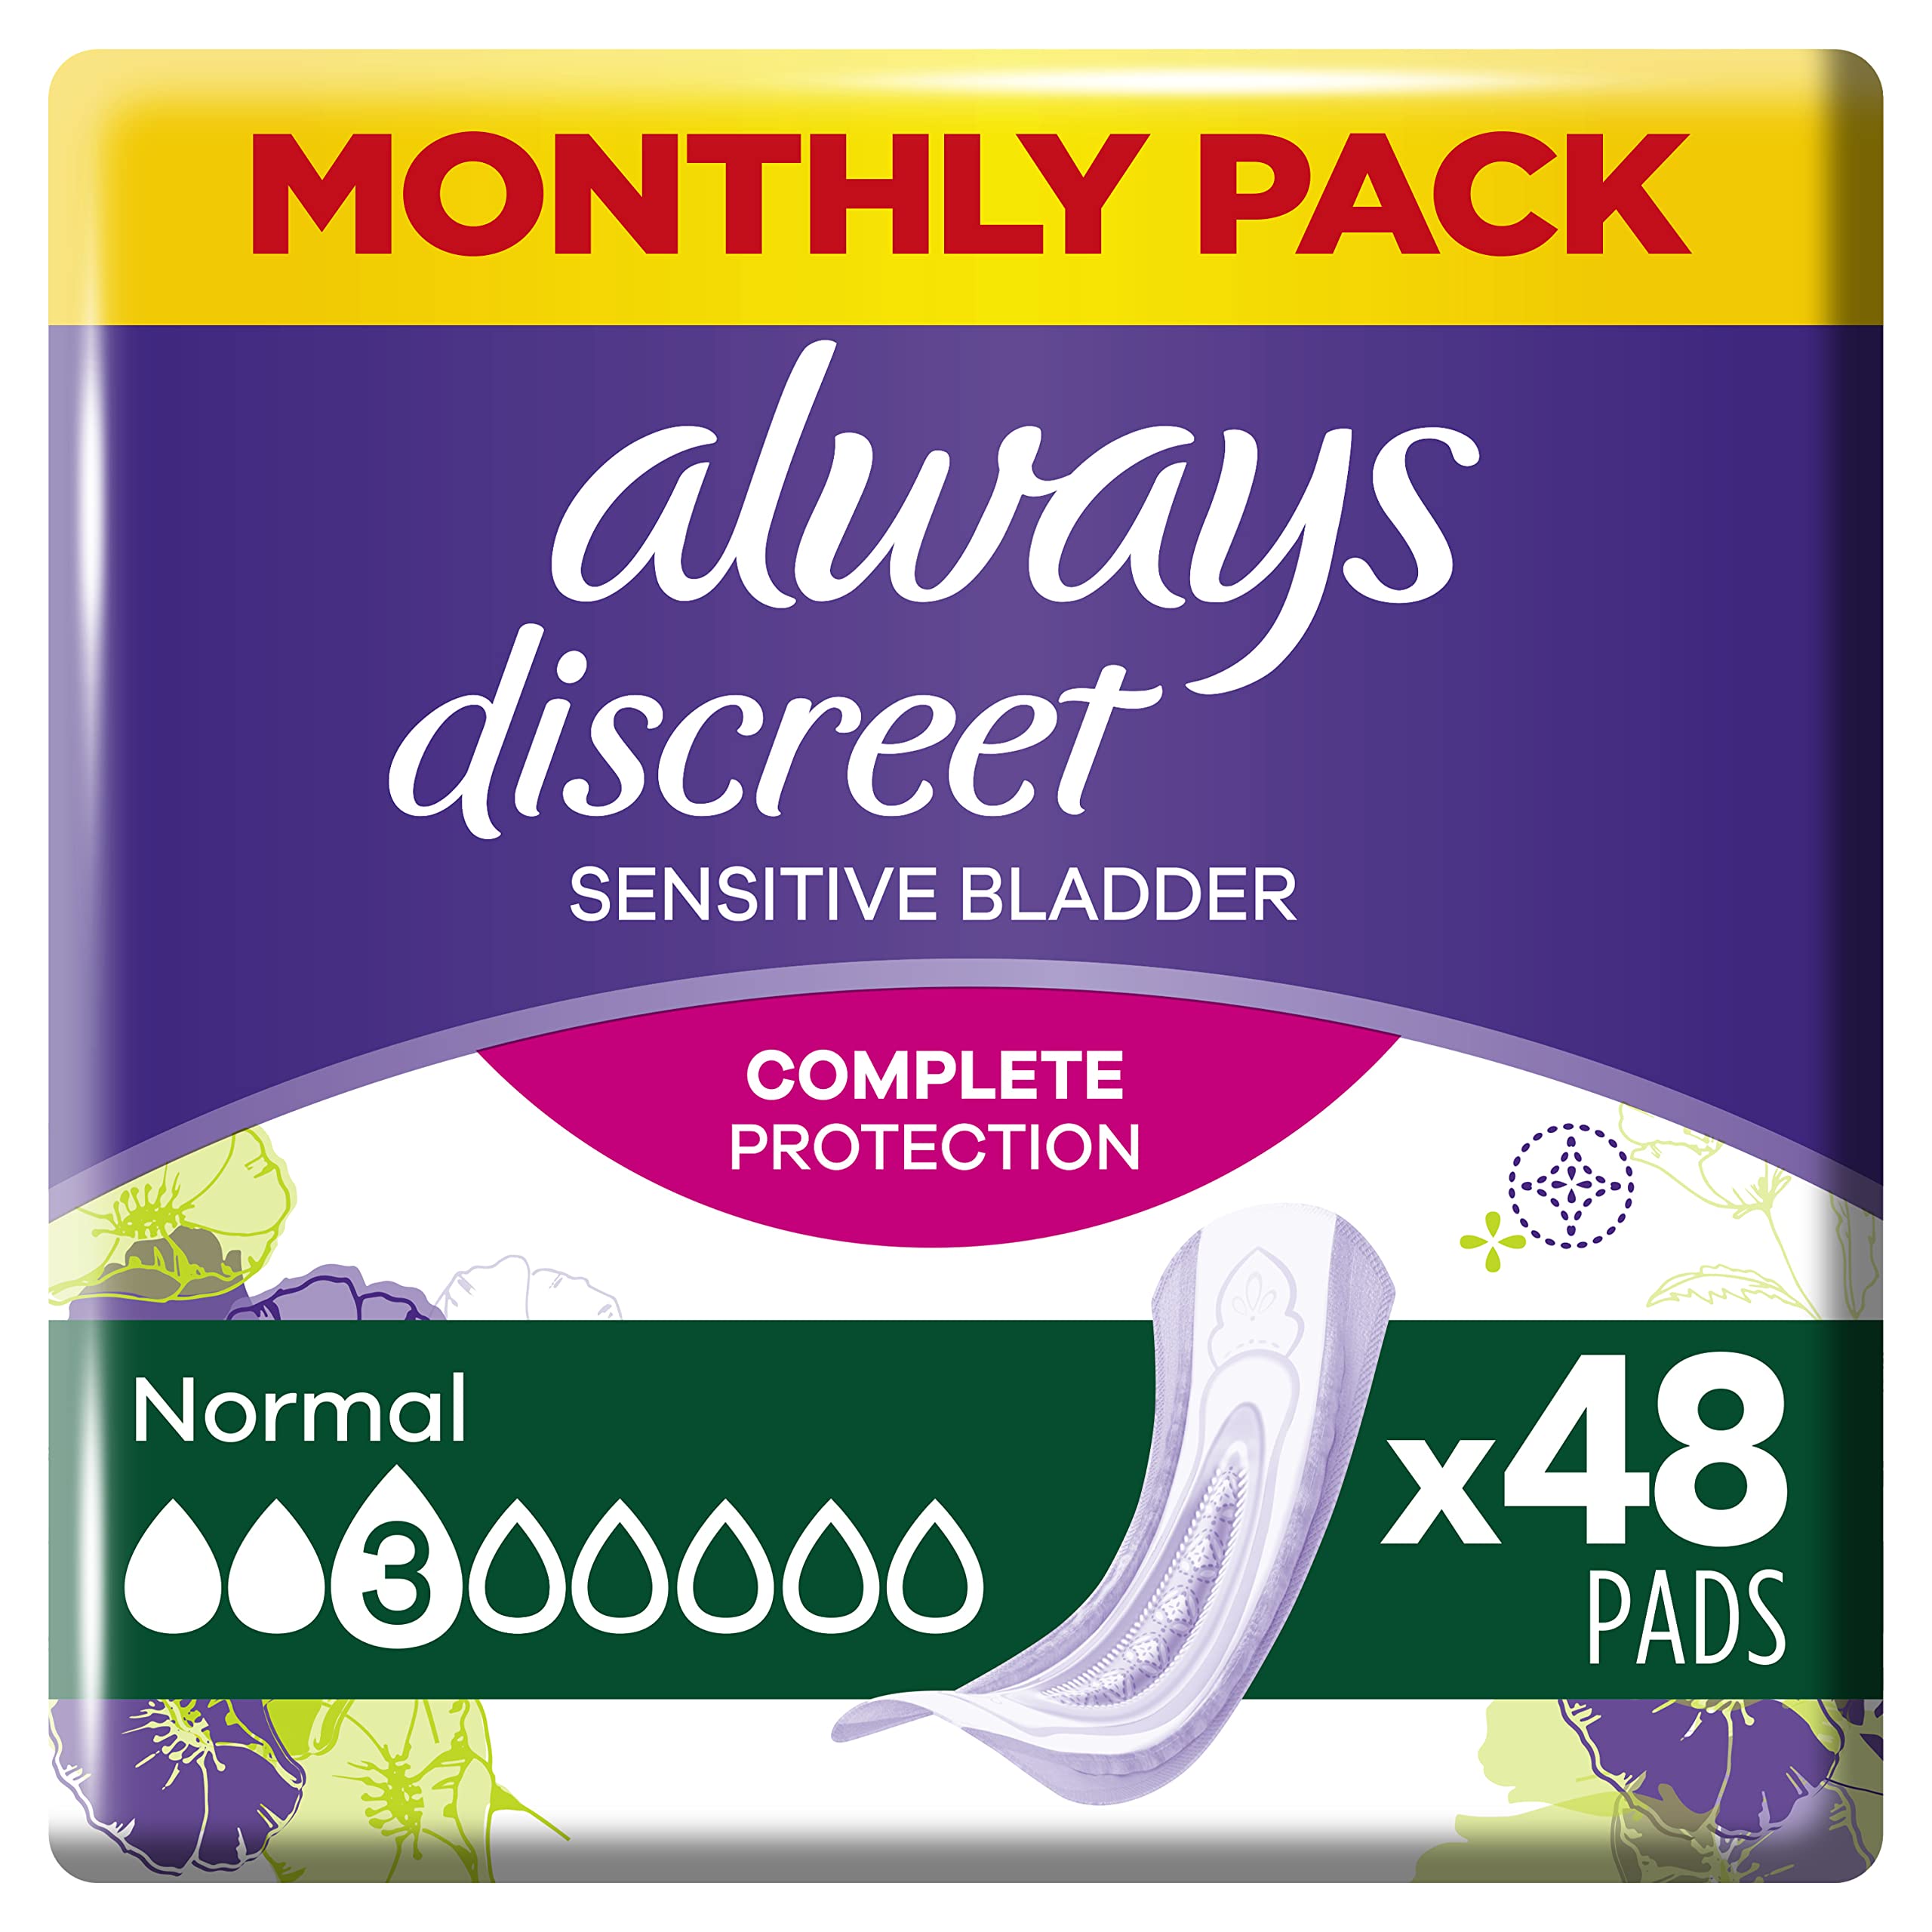 Long Moderate Absorbency Discreet Bladder Protection Pads